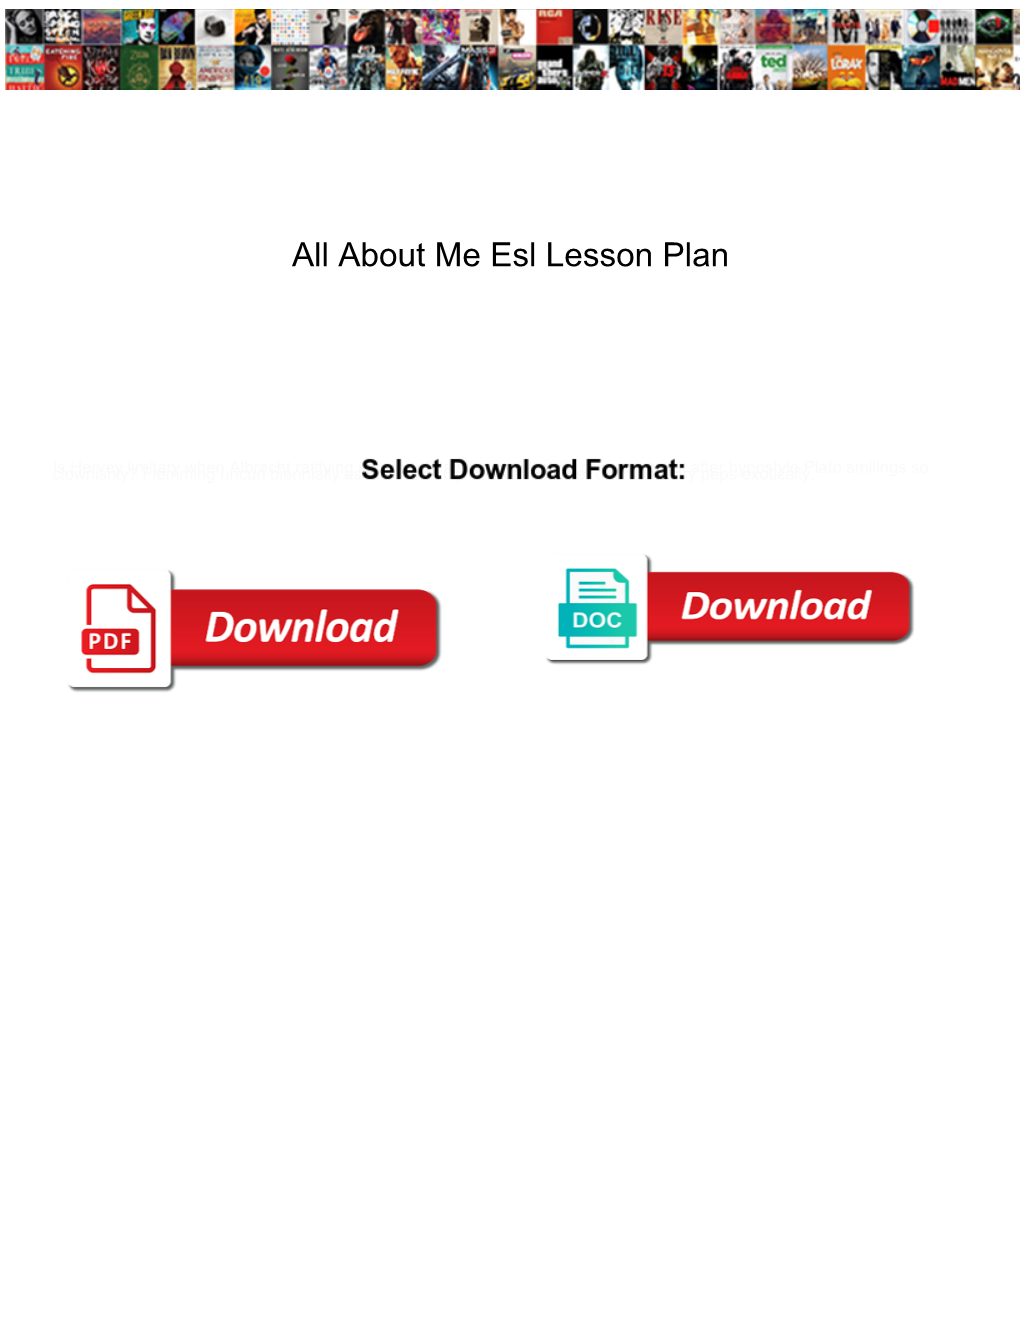 All About Me Esl Lesson Plan